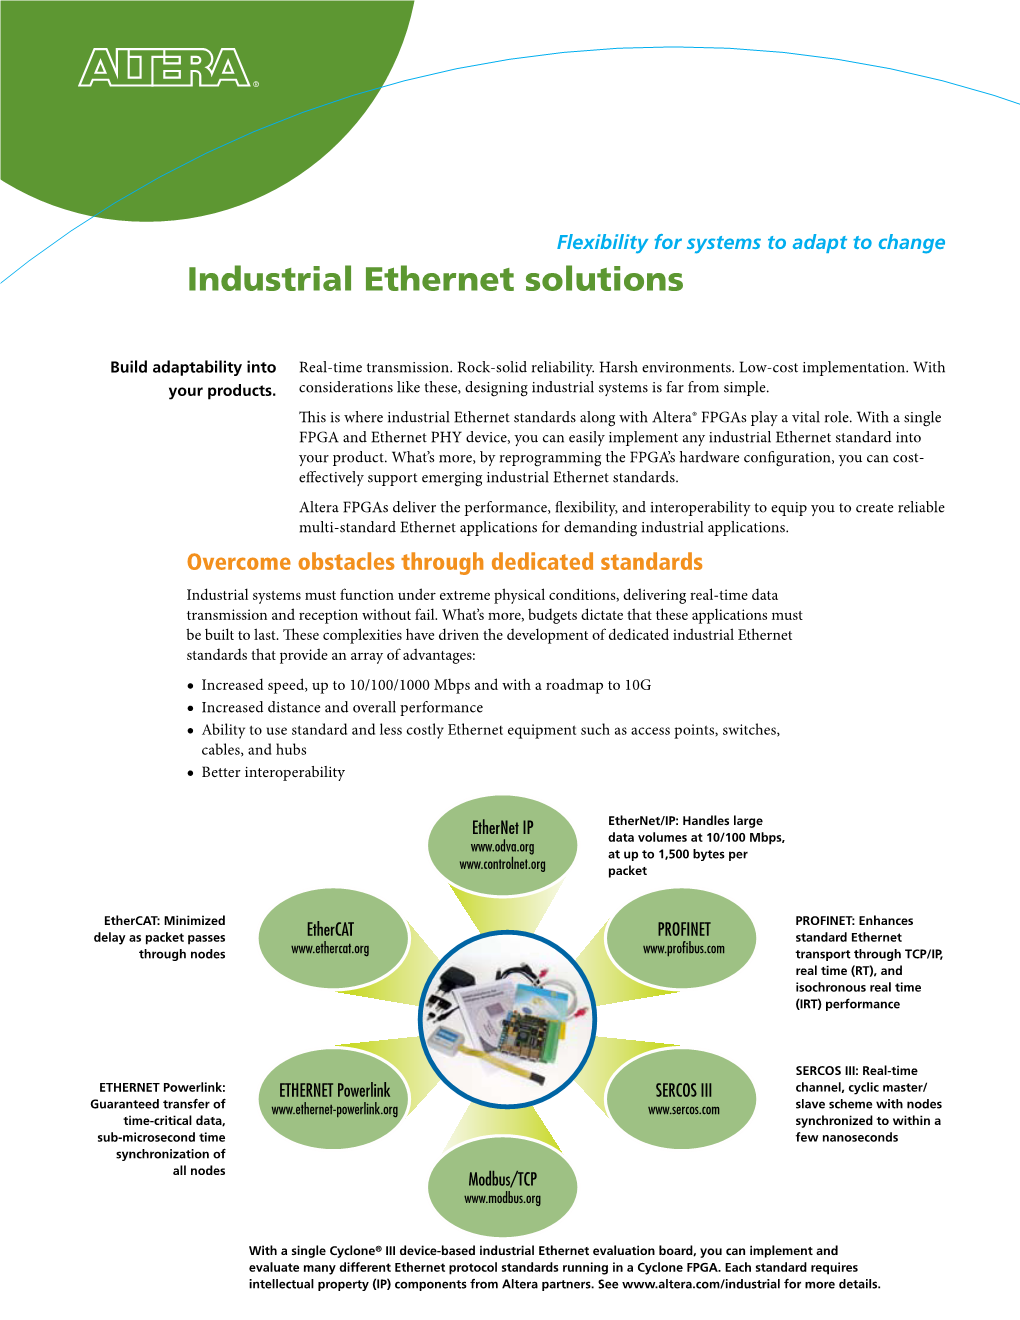 Industrial Ethernet Solutions from Altera